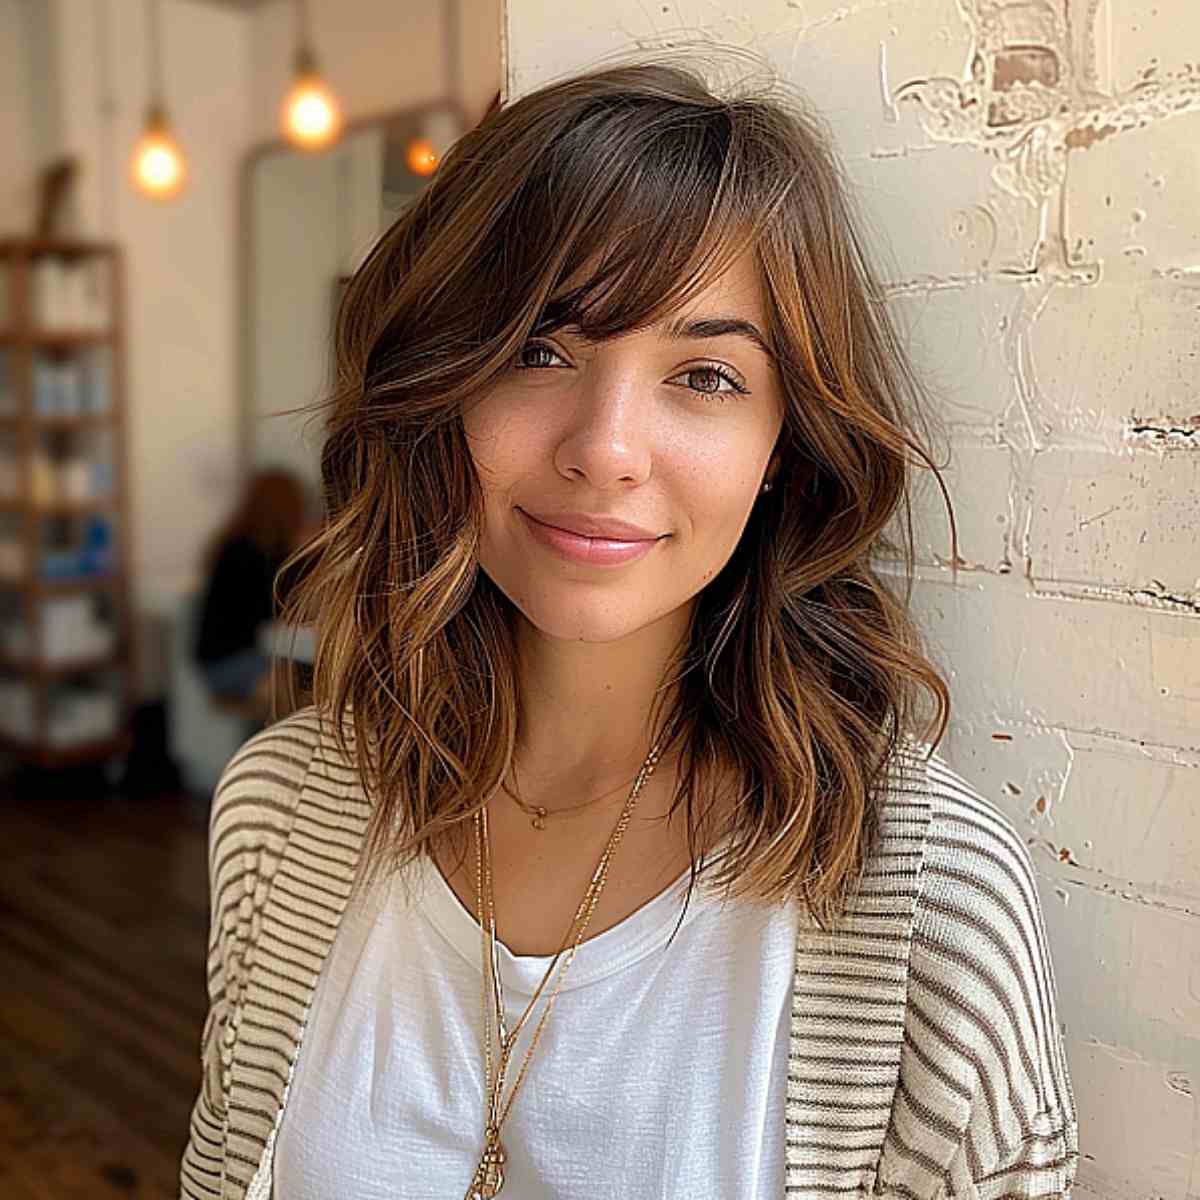 Trendsetting long wavy bob hairstyle with side bangs for round face shapes